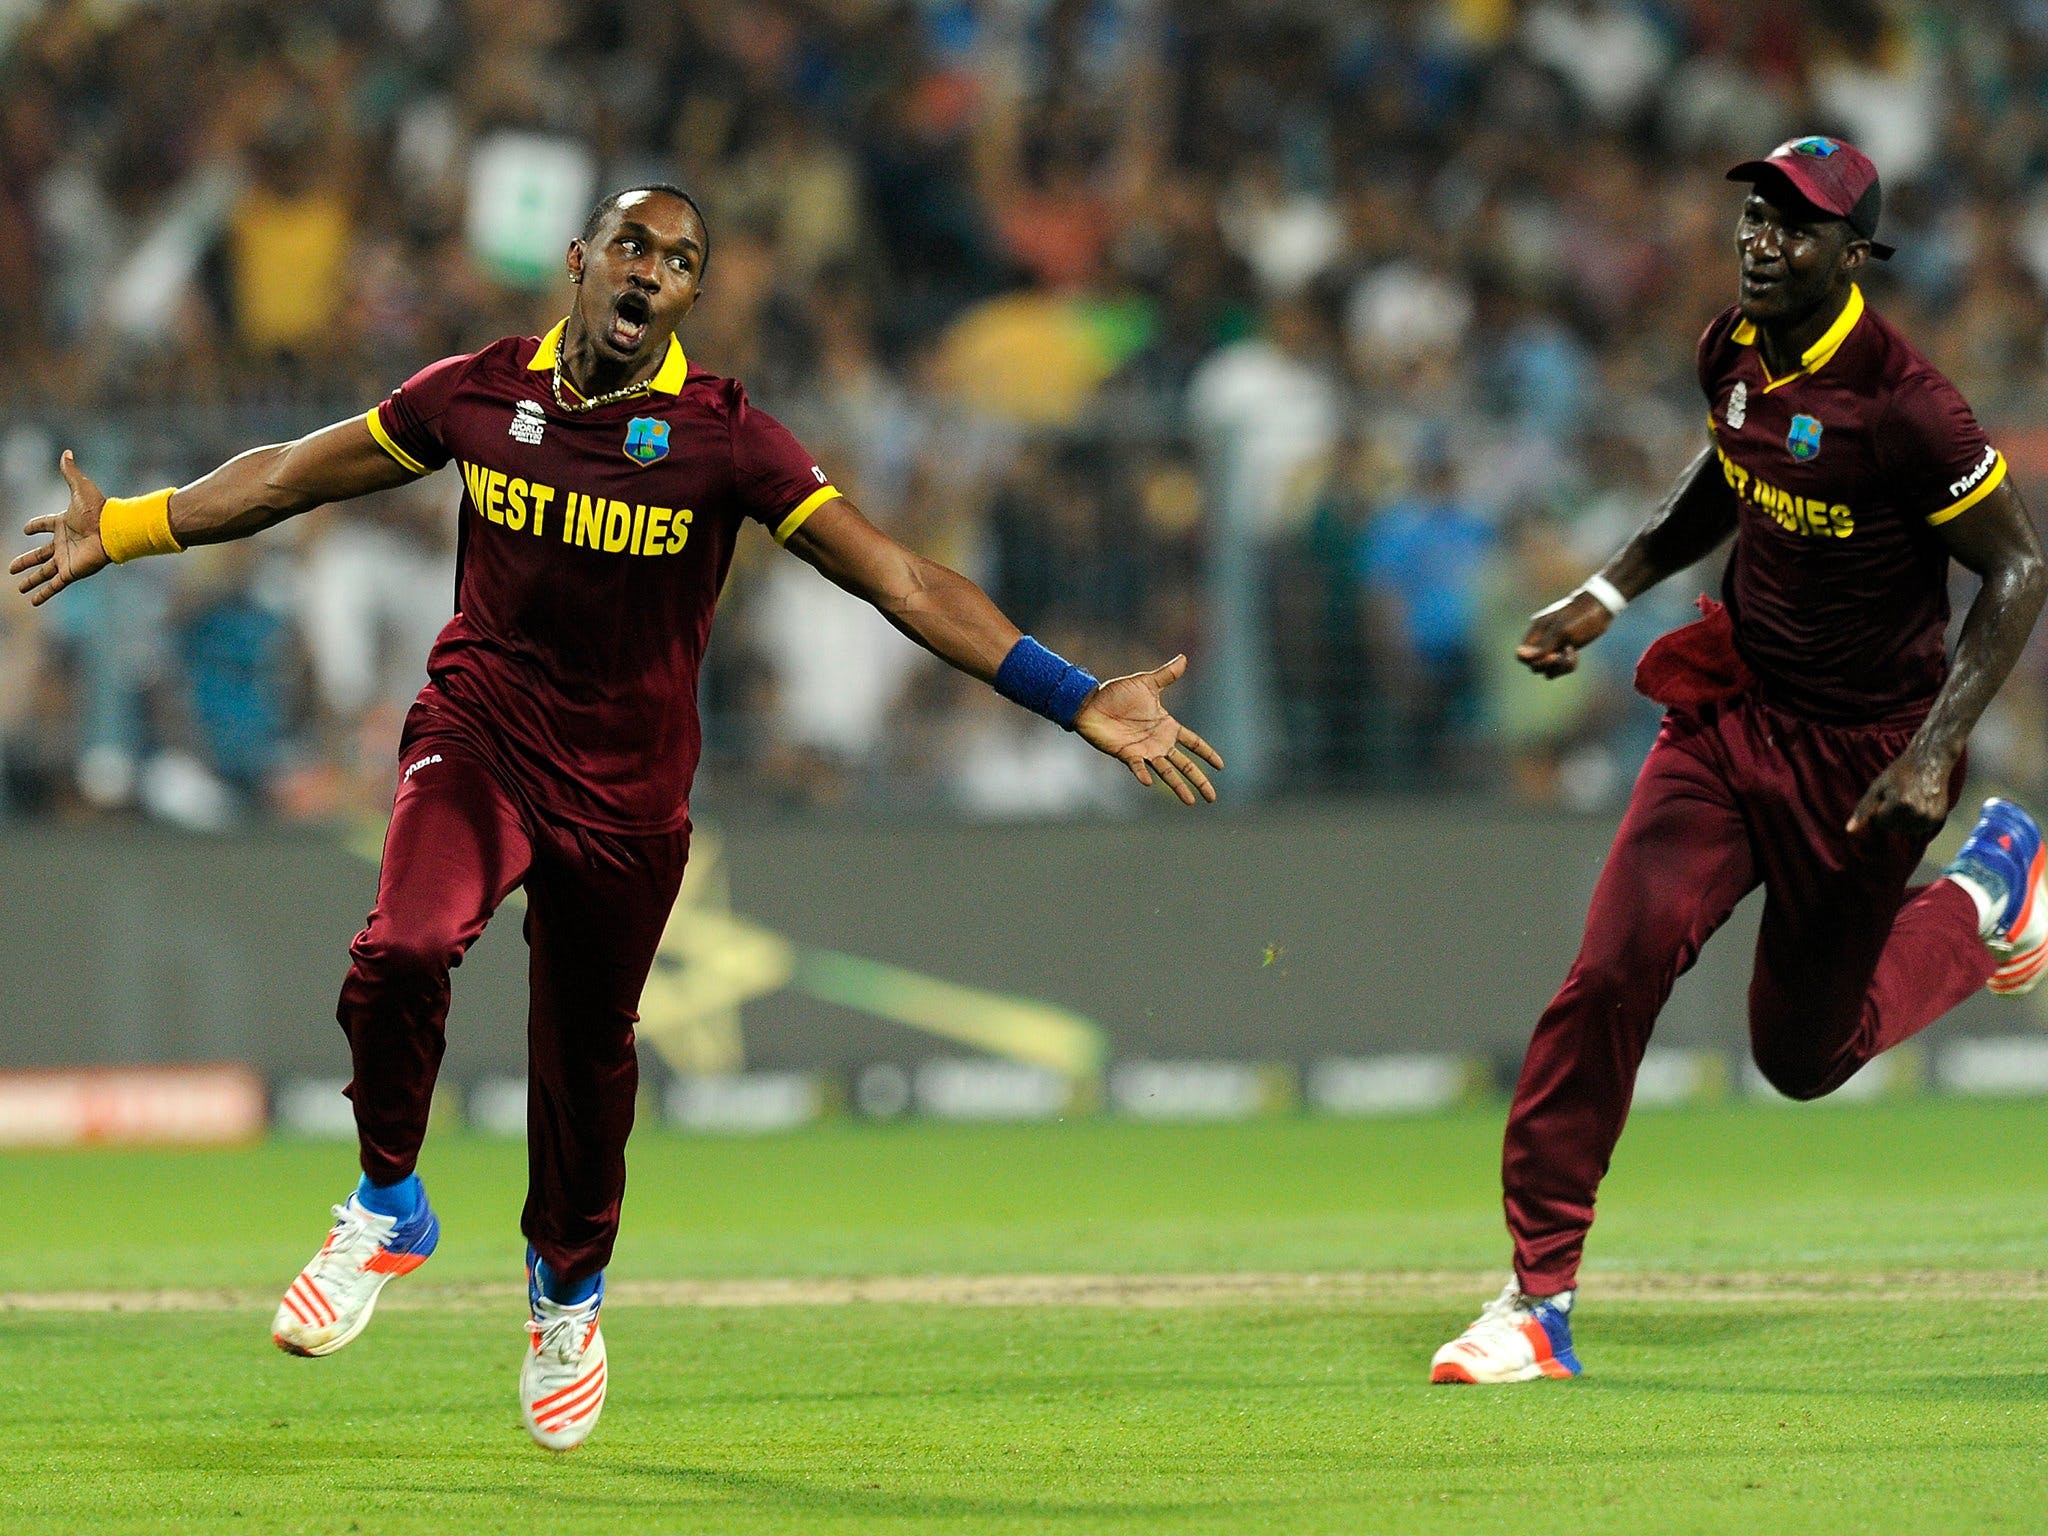 ICC Men's T20 World Cup - West Indies v Qualifier B2 - Accommodation Resorts